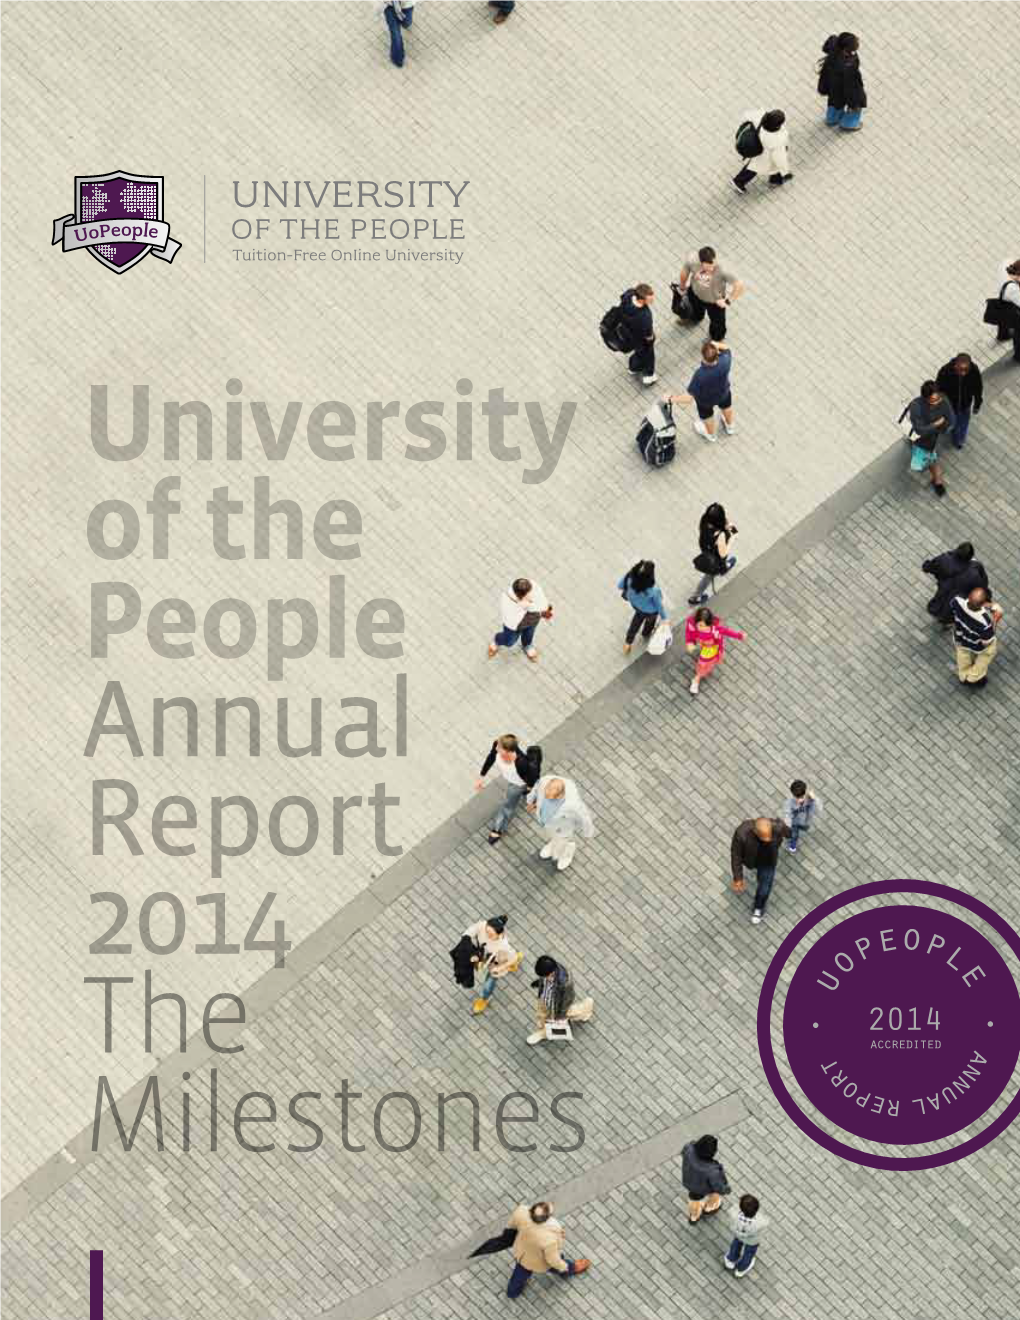 Uopeople Annual Report, 2014